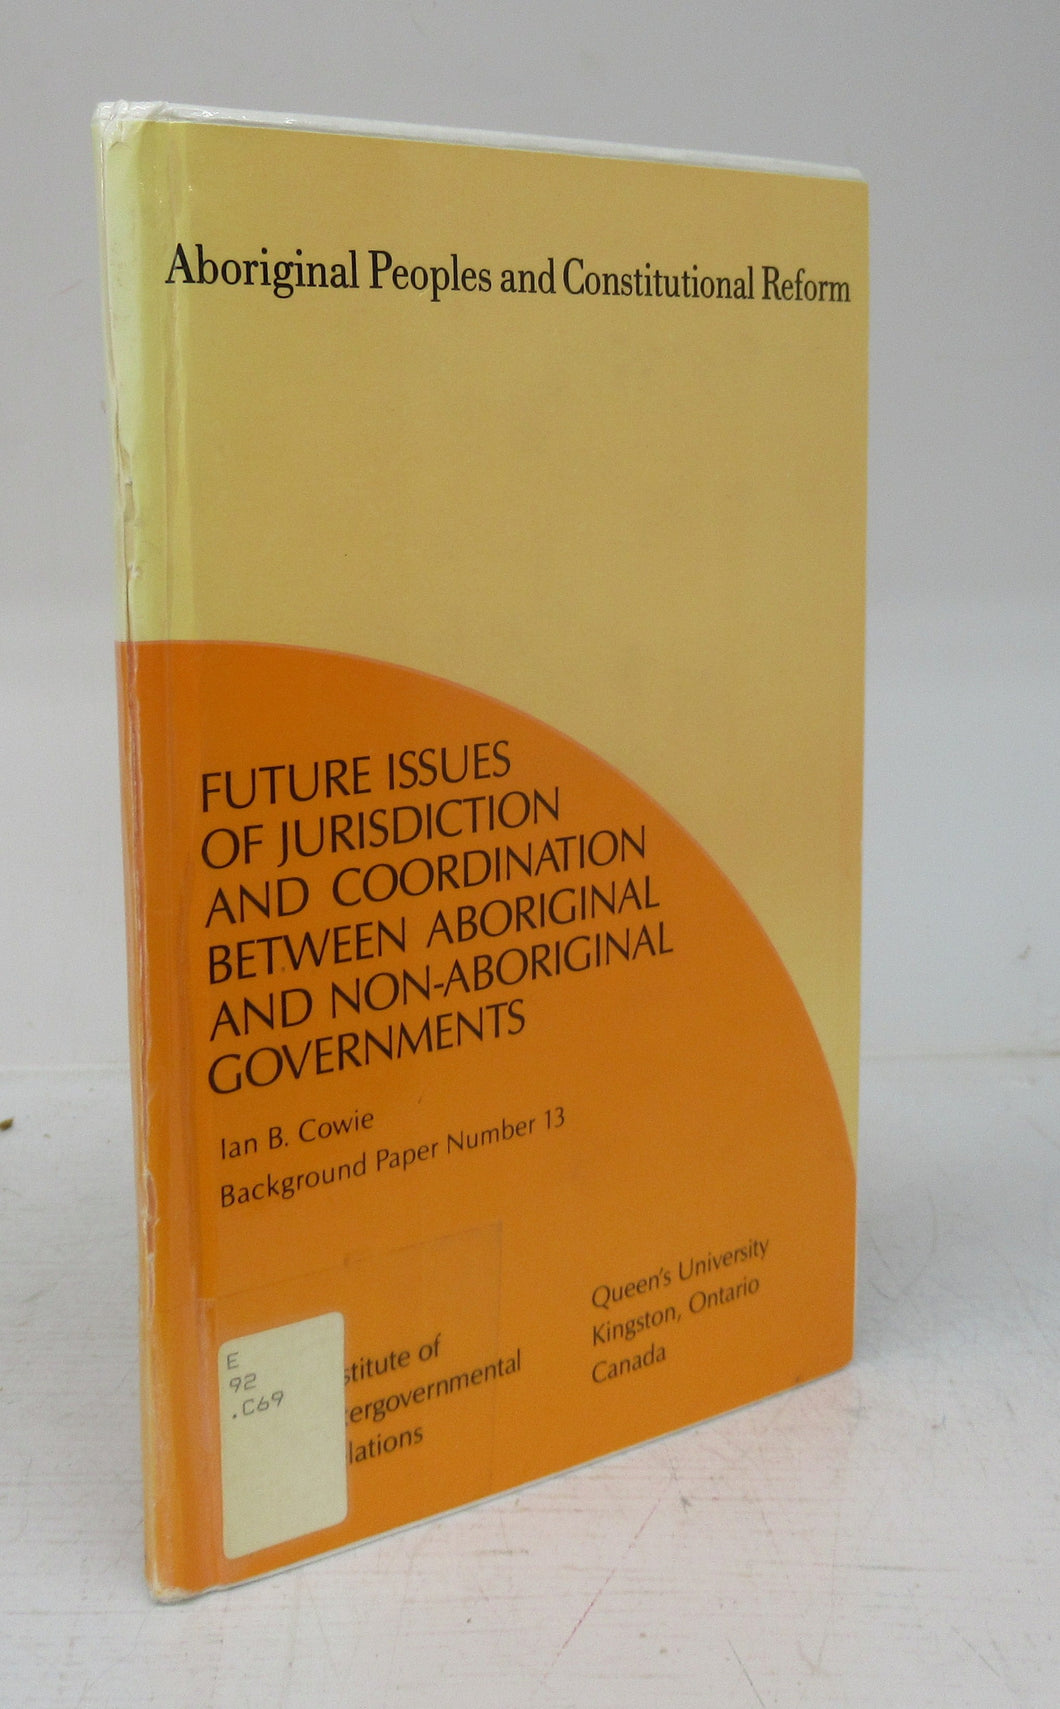 Future Issues of Jurisdiction and Coordination Between Aboriginal and Non-Aboriginal Governments